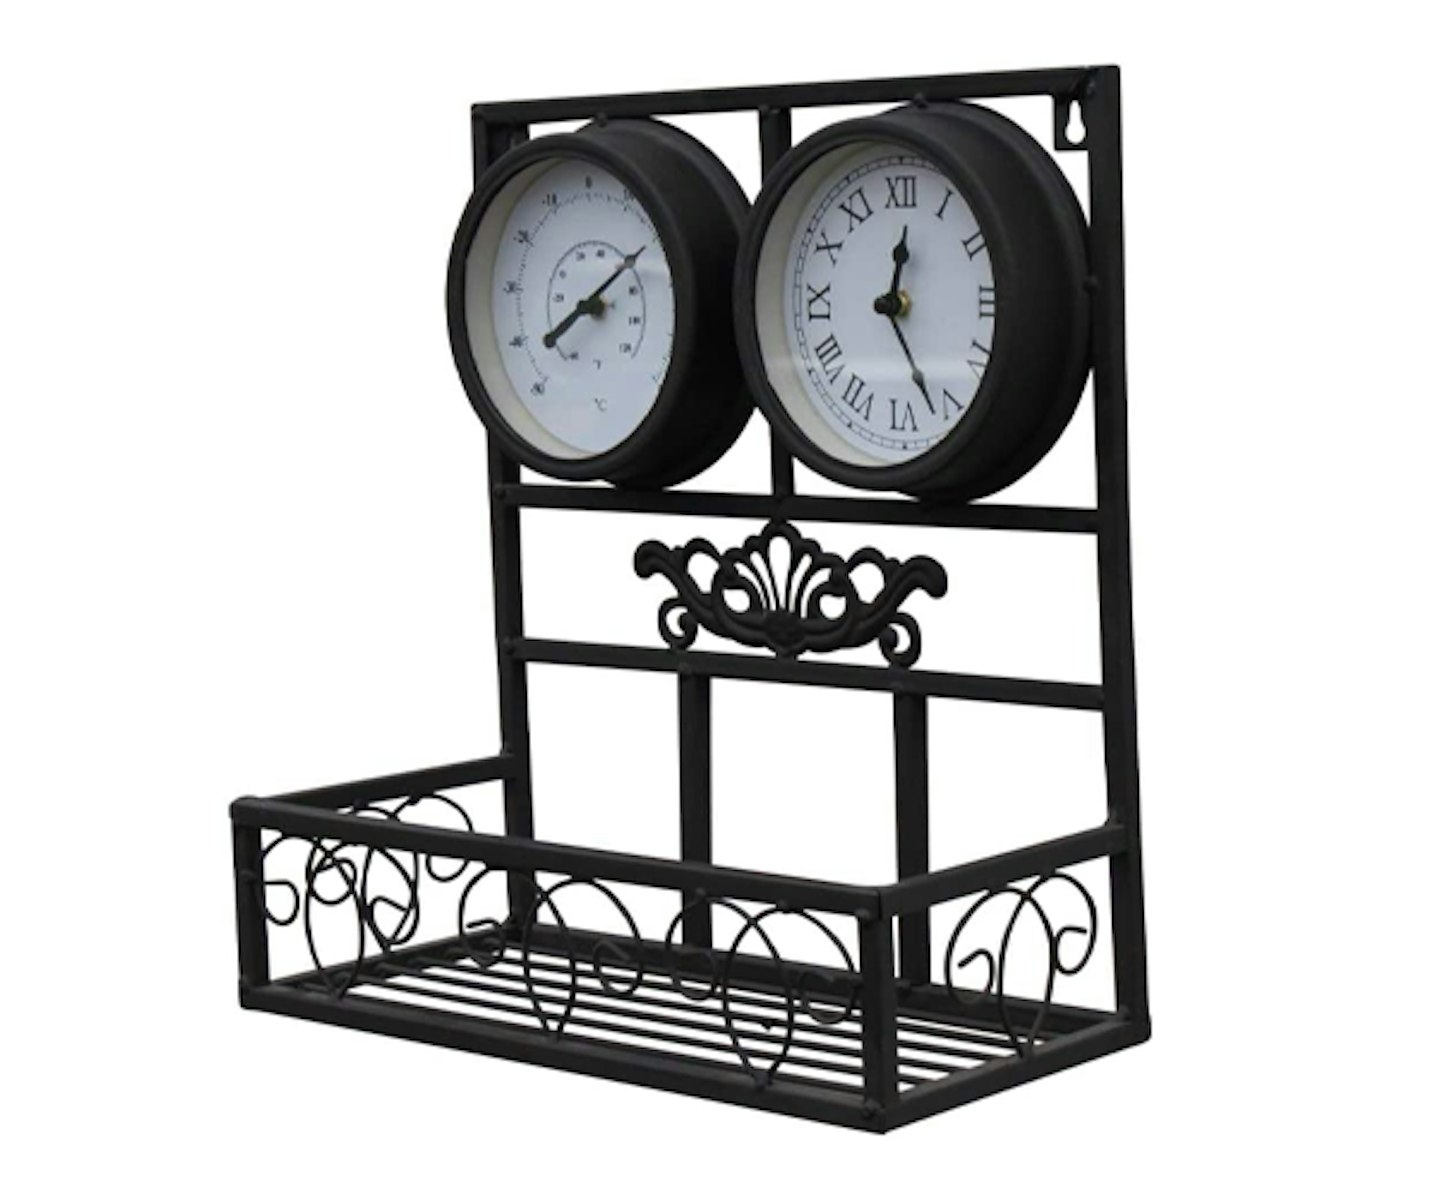 Decorative Garden Clock With Thermometer